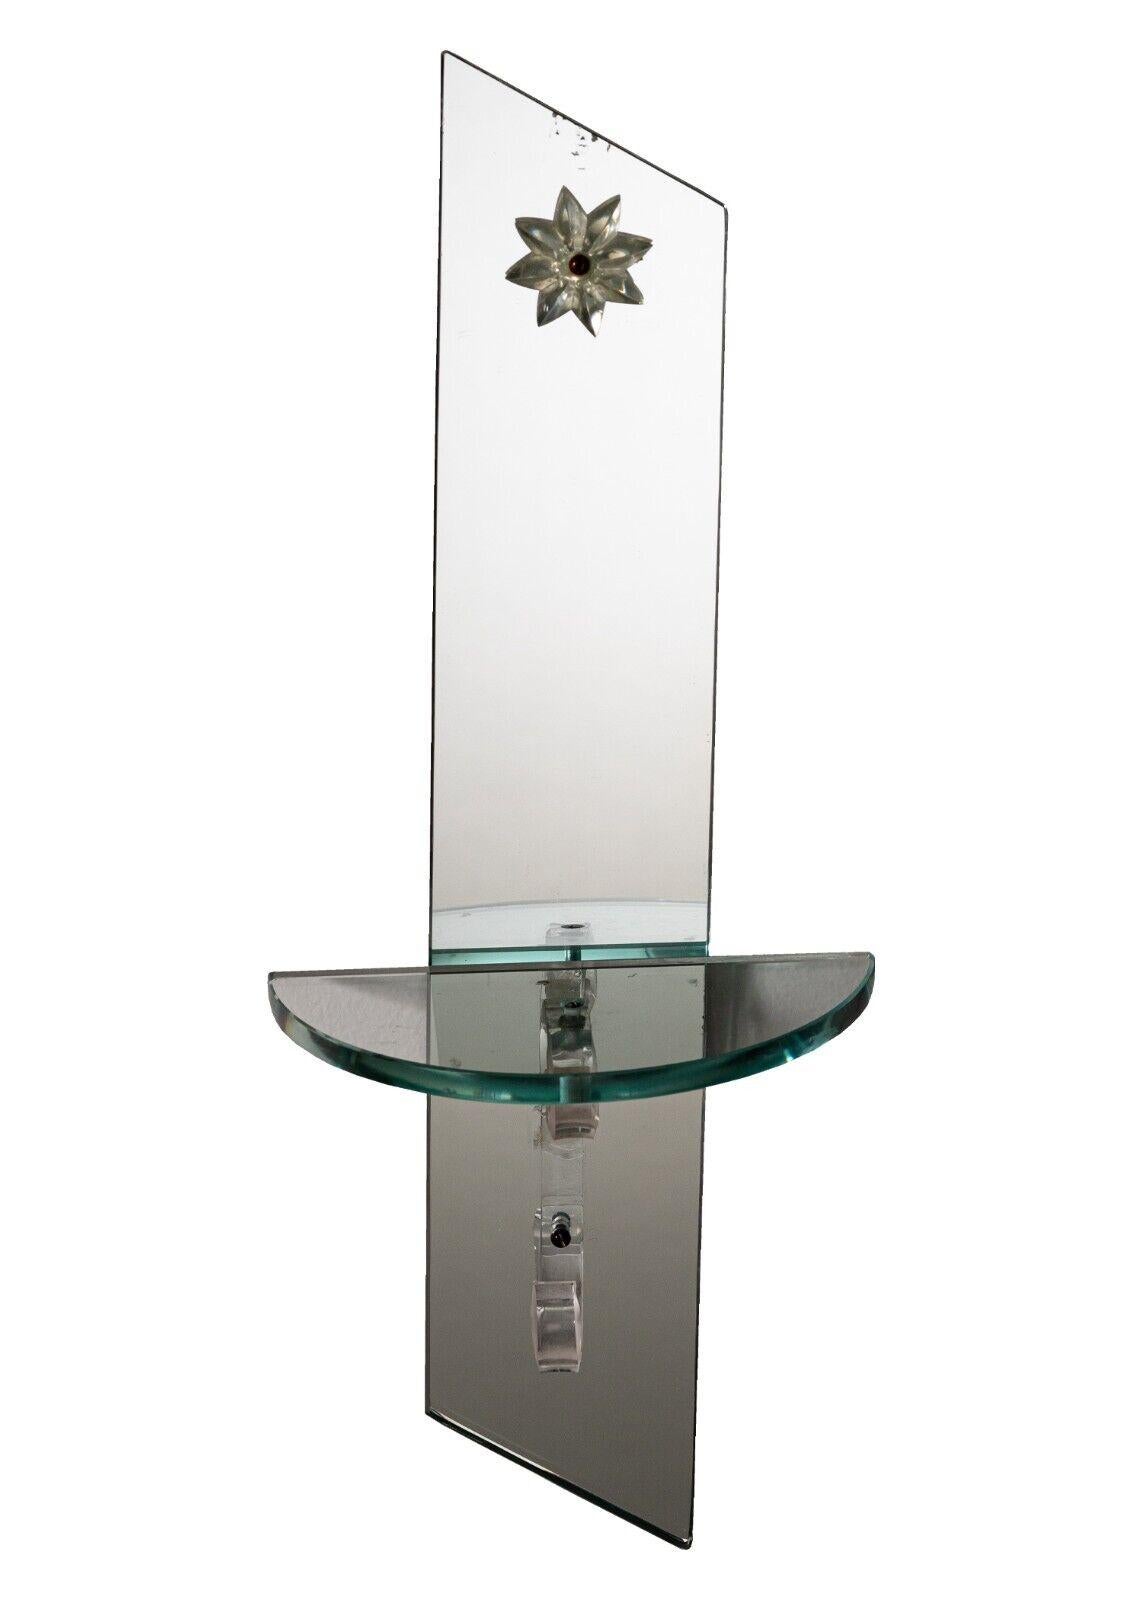 These Art Deco mirrored glass sconce shelfs are a one-of-a-kind statement piece. The intricate frames feature geometric designs with a hint of classic art deco style. The shelves are made from mirrored glass that reflects light and creates a subtle